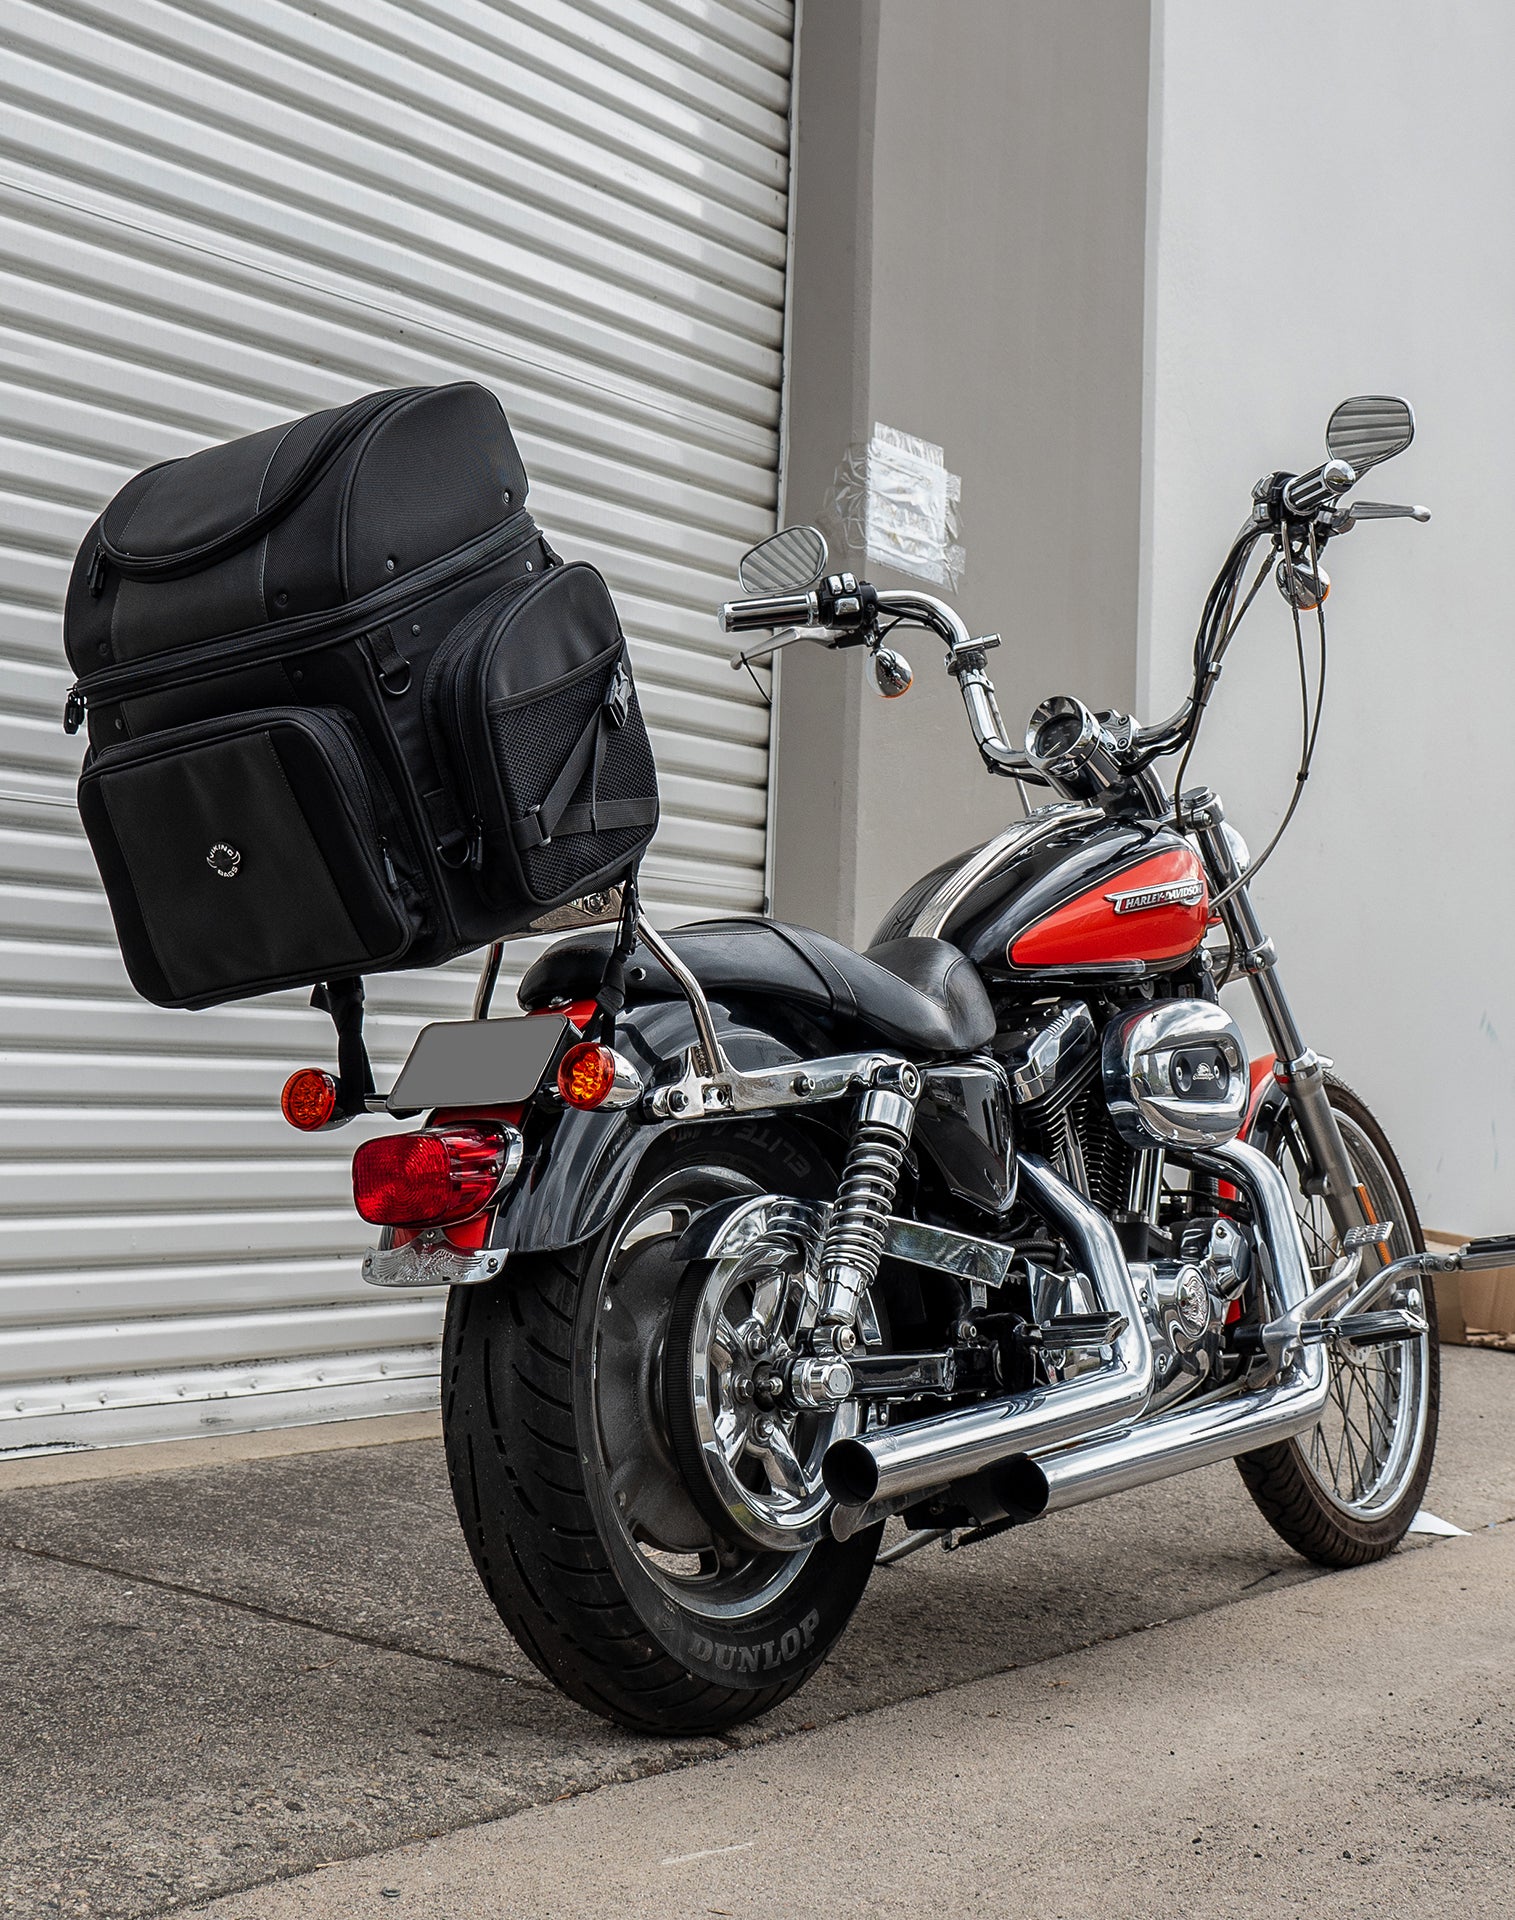 52L - Galleon XL Indian Motorcycle Tail Bag